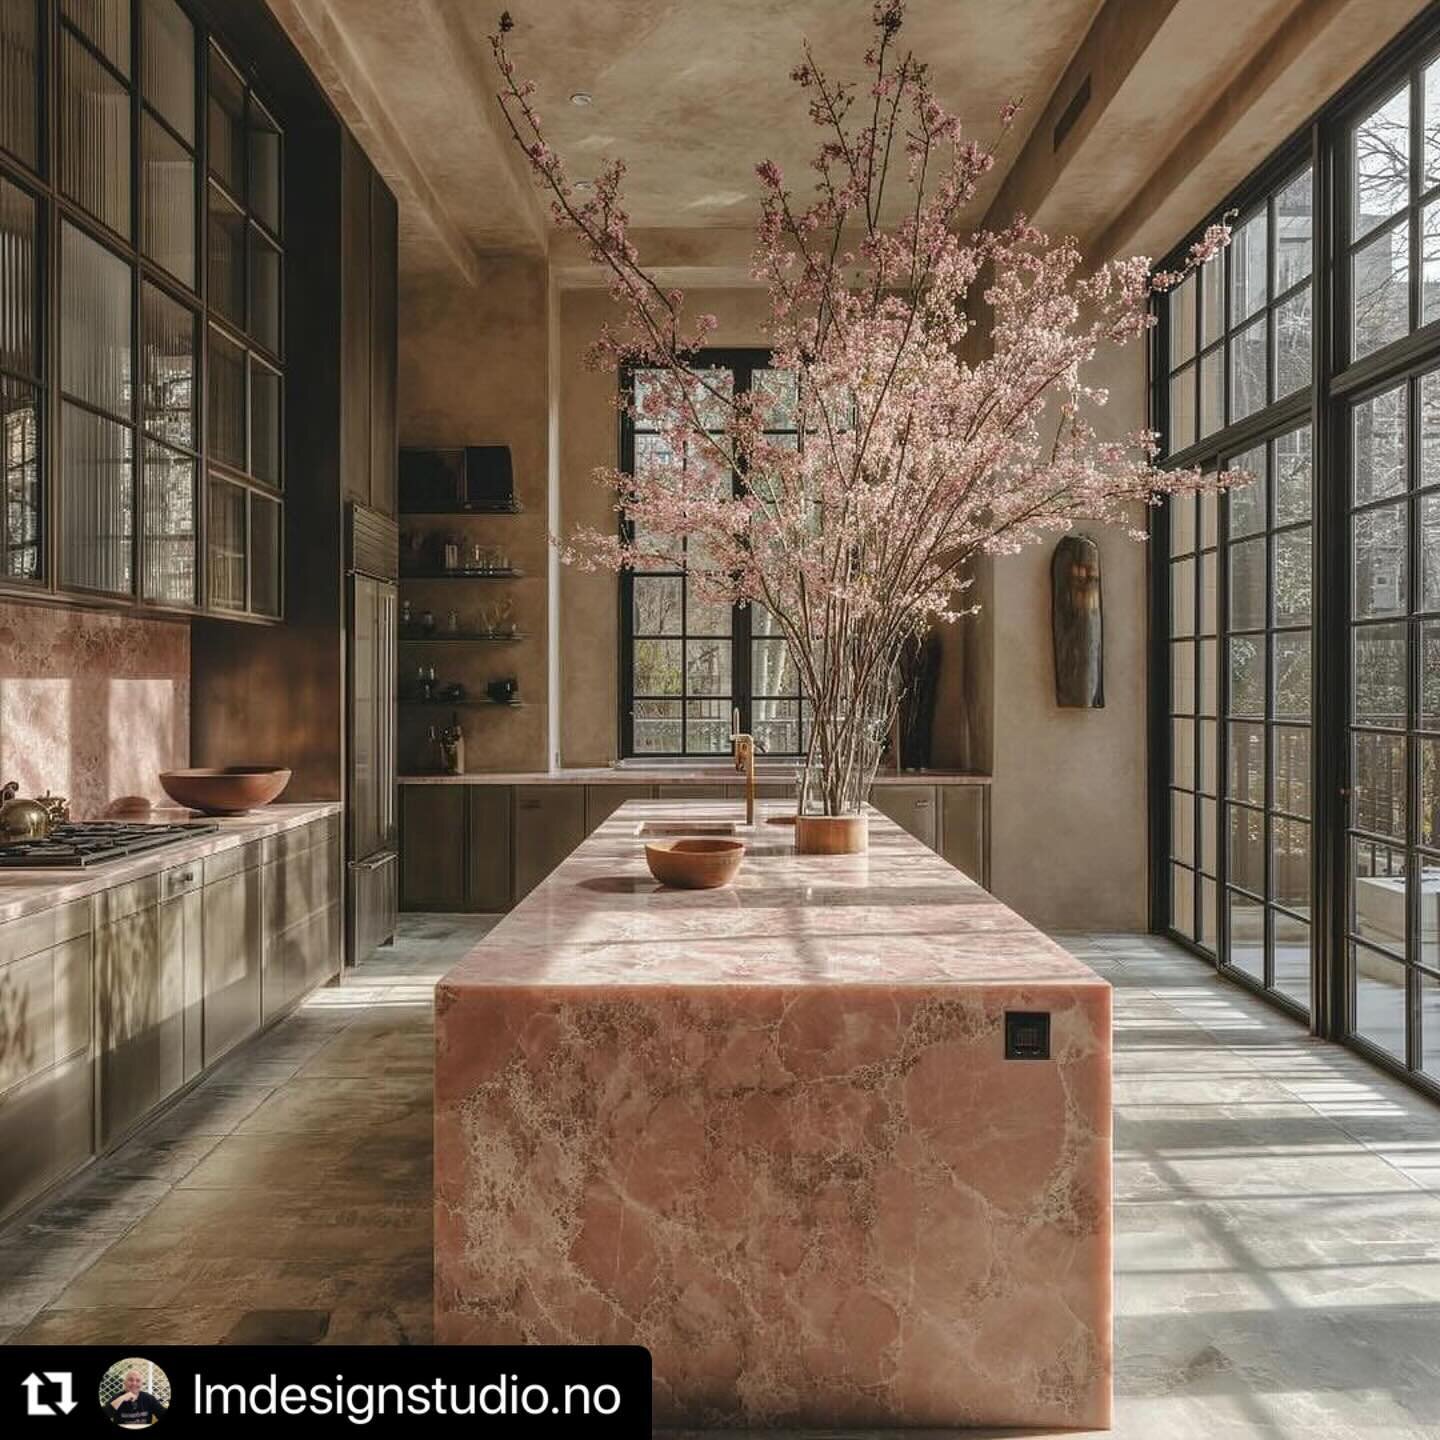 #Repost @lmdesignstudio.no with @use.repost
・・・
This kitchen stands as a testament to unity and strength. The monolythic island with its singular, cohesive presence commands attention with its sheer simplicity and grandeur. It speaks of a unified vis